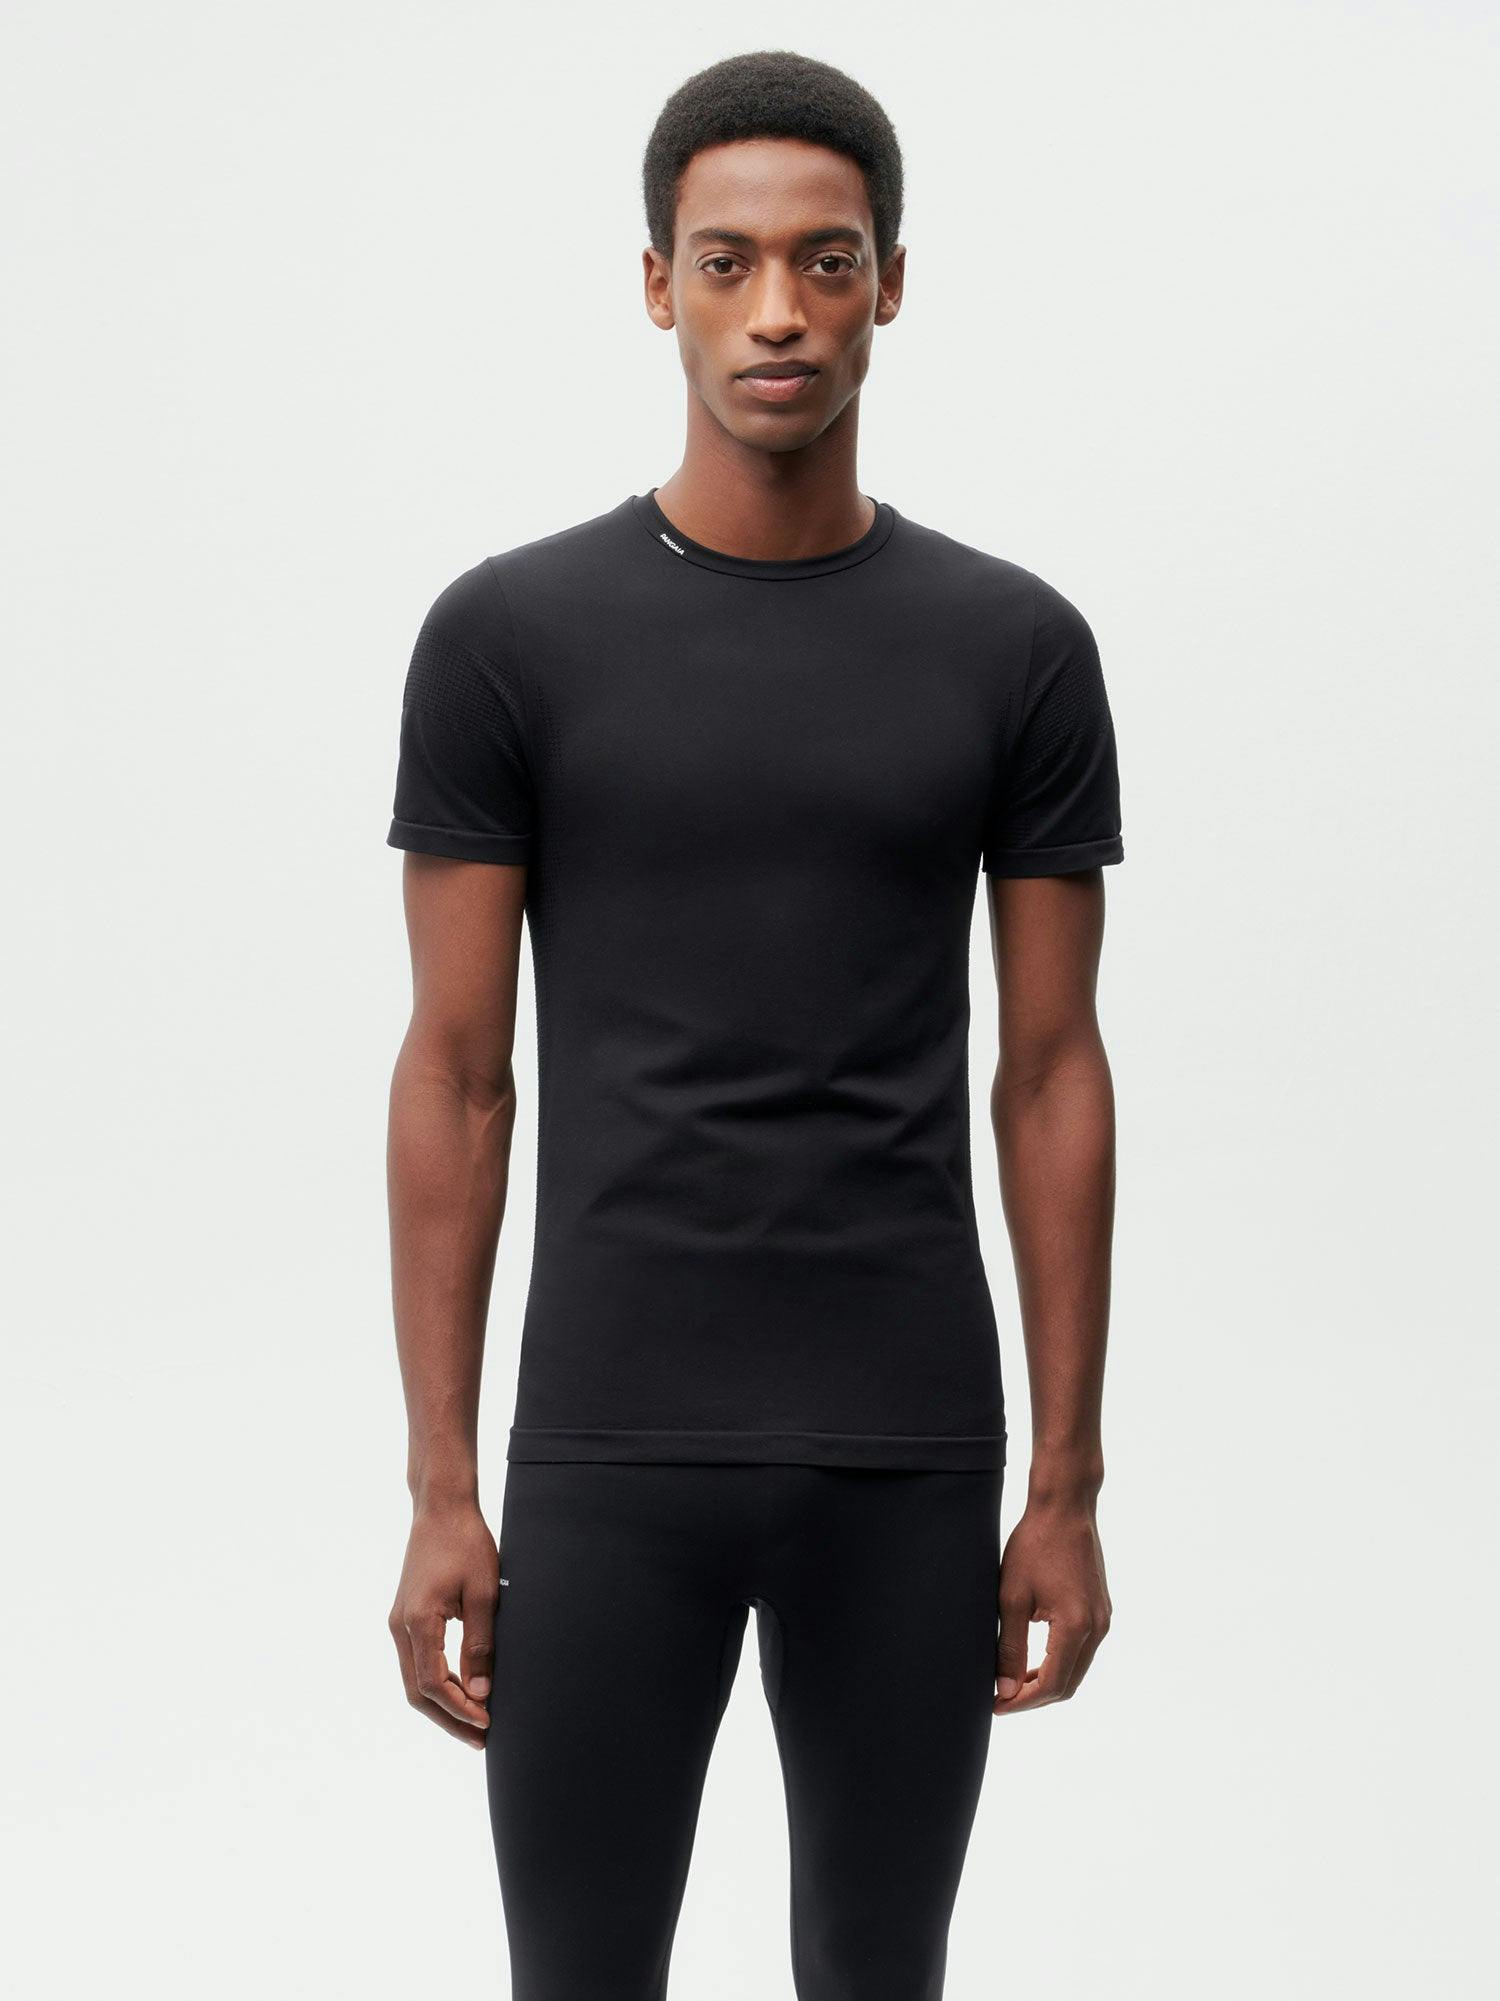 https://cdn.shopify.com/s/files/1/0035/1309/0115/products/Activewear-Mens-Fitted-T-Shirt-Black-Male-1.jpg?v=1662476186